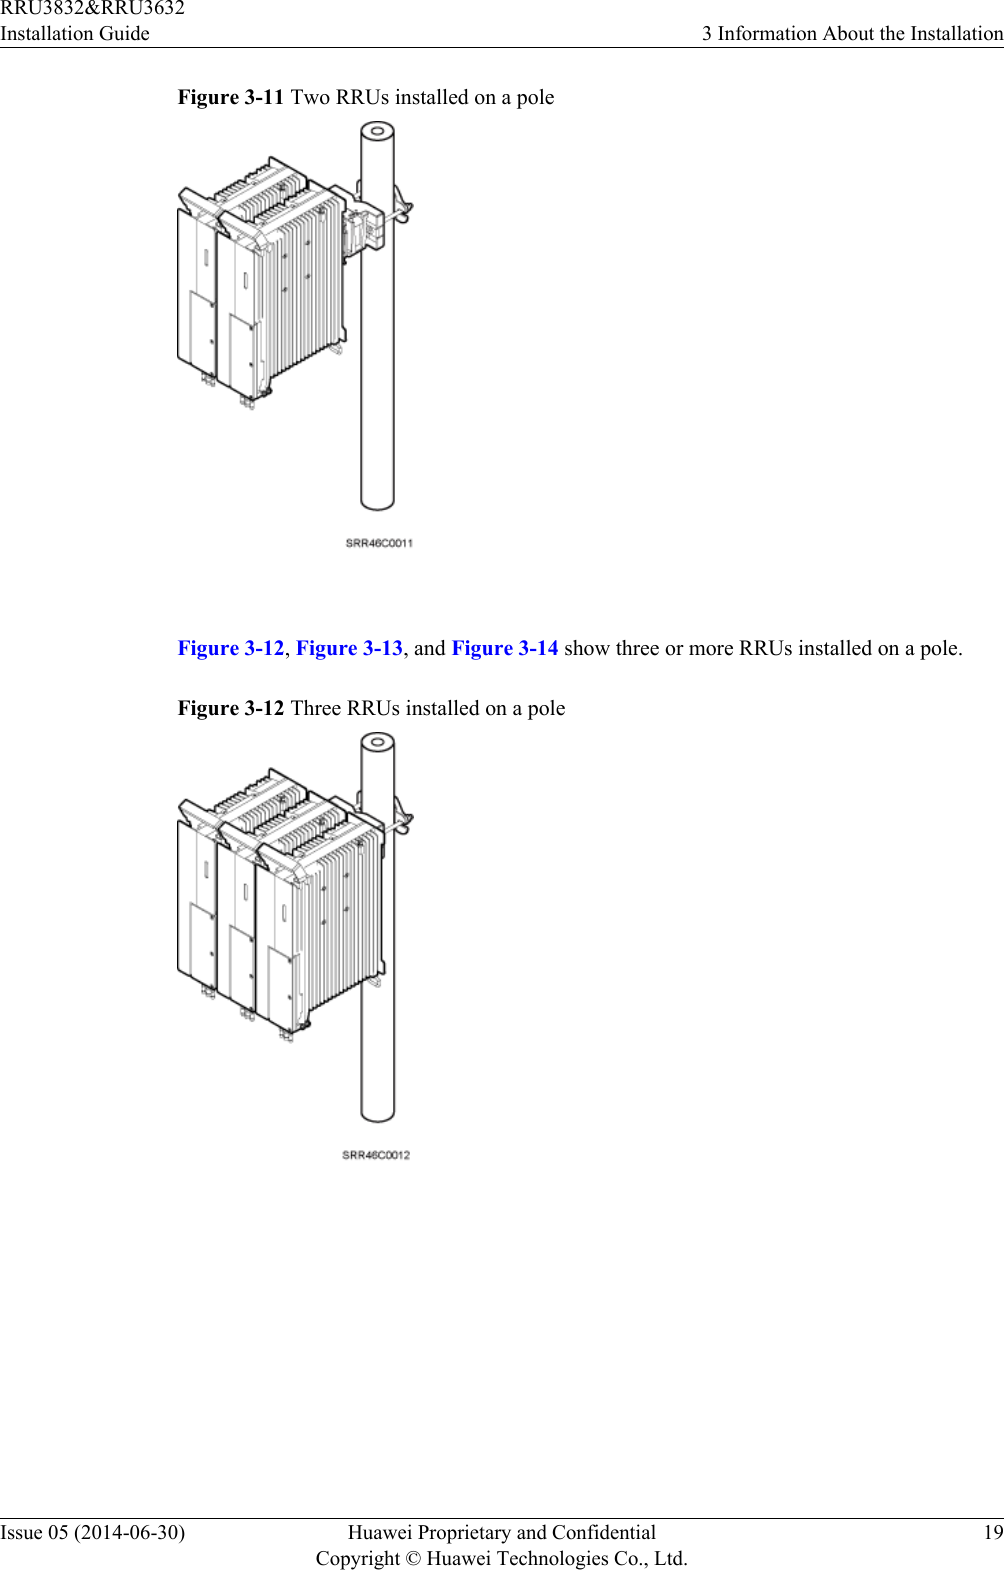 Figure 3-11 Two RRUs installed on a pole Figure 3-12, Figure 3-13, and Figure 3-14 show three or more RRUs installed on a pole.Figure 3-12 Three RRUs installed on a pole RRU3832&amp;RRU3632Installation Guide 3 Information About the InstallationIssue 05 (2014-06-30) Huawei Proprietary and ConfidentialCopyright © Huawei Technologies Co., Ltd.19